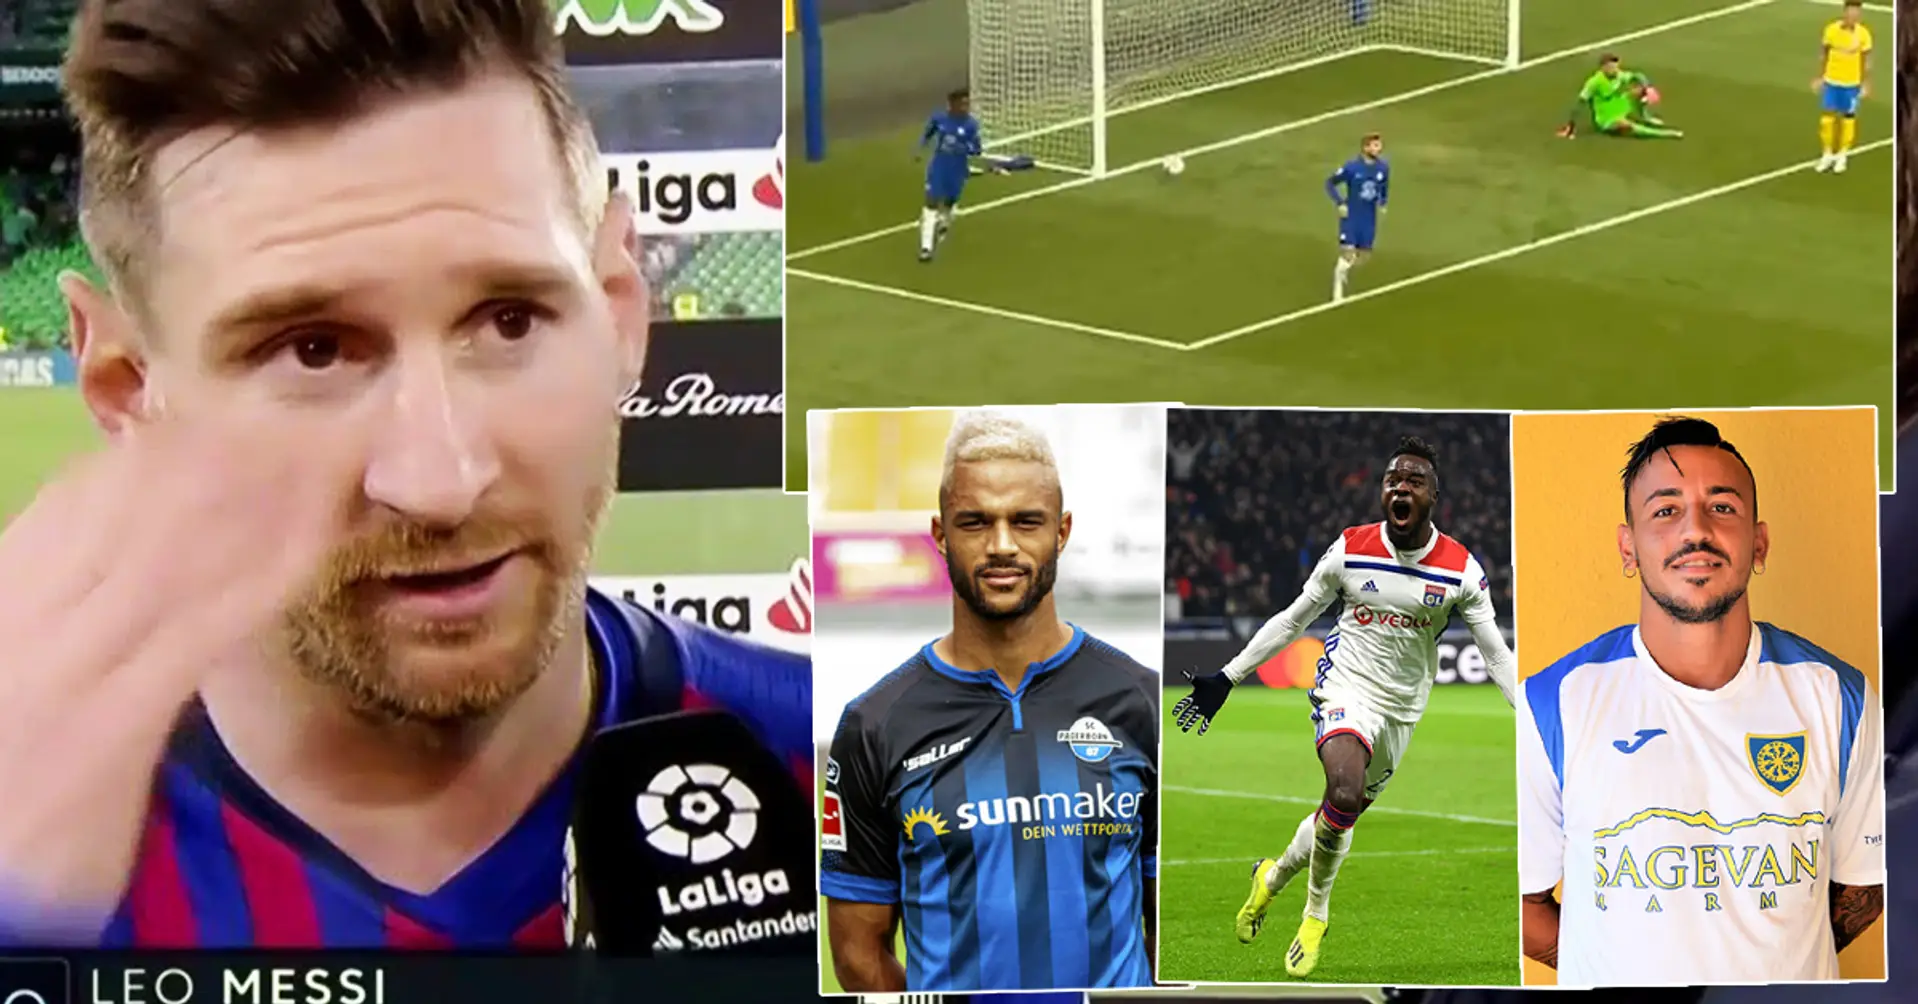 In 2015, Leo Messi picked 10 talents to become future stars - where are they now?